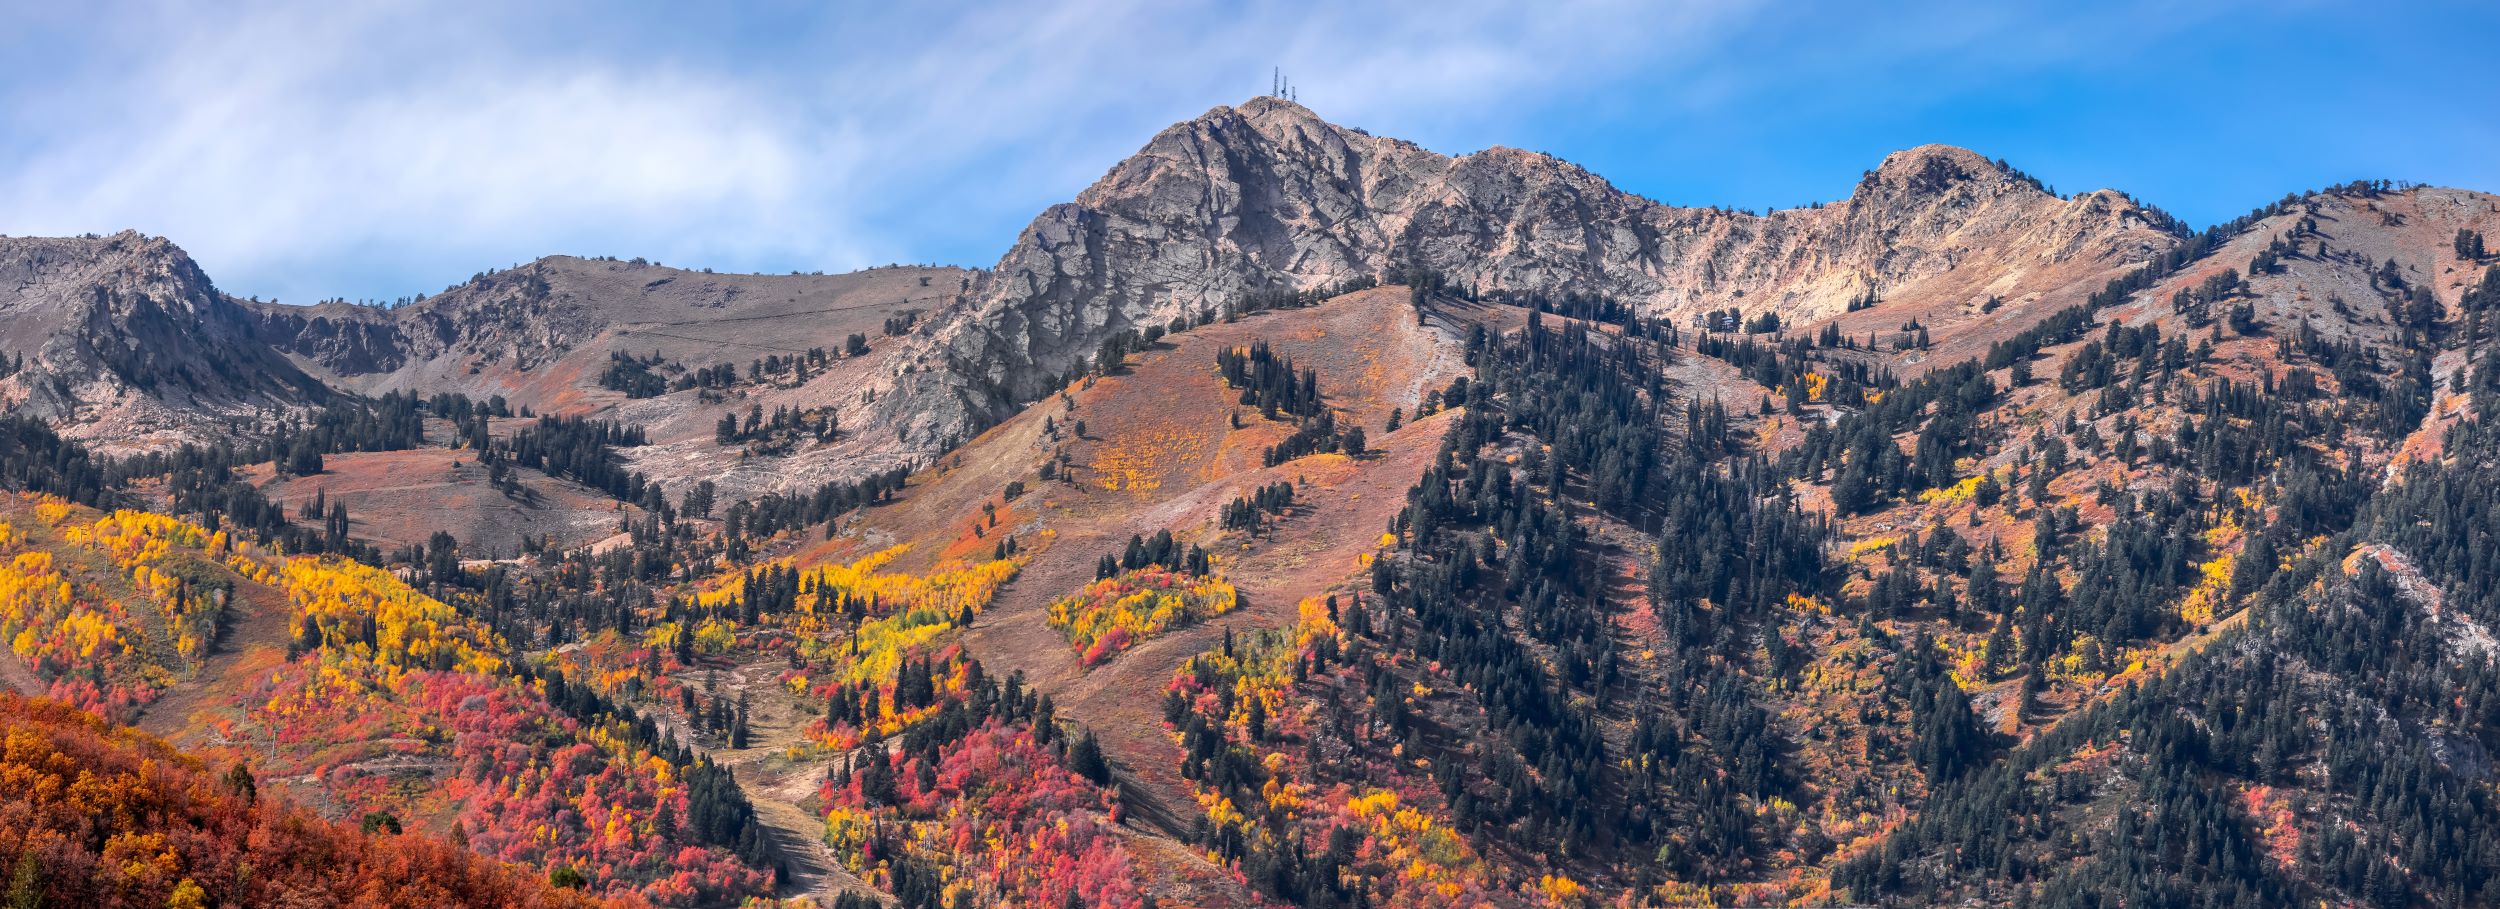 Mt Ogden peak with colorful fall foliage in Utah.